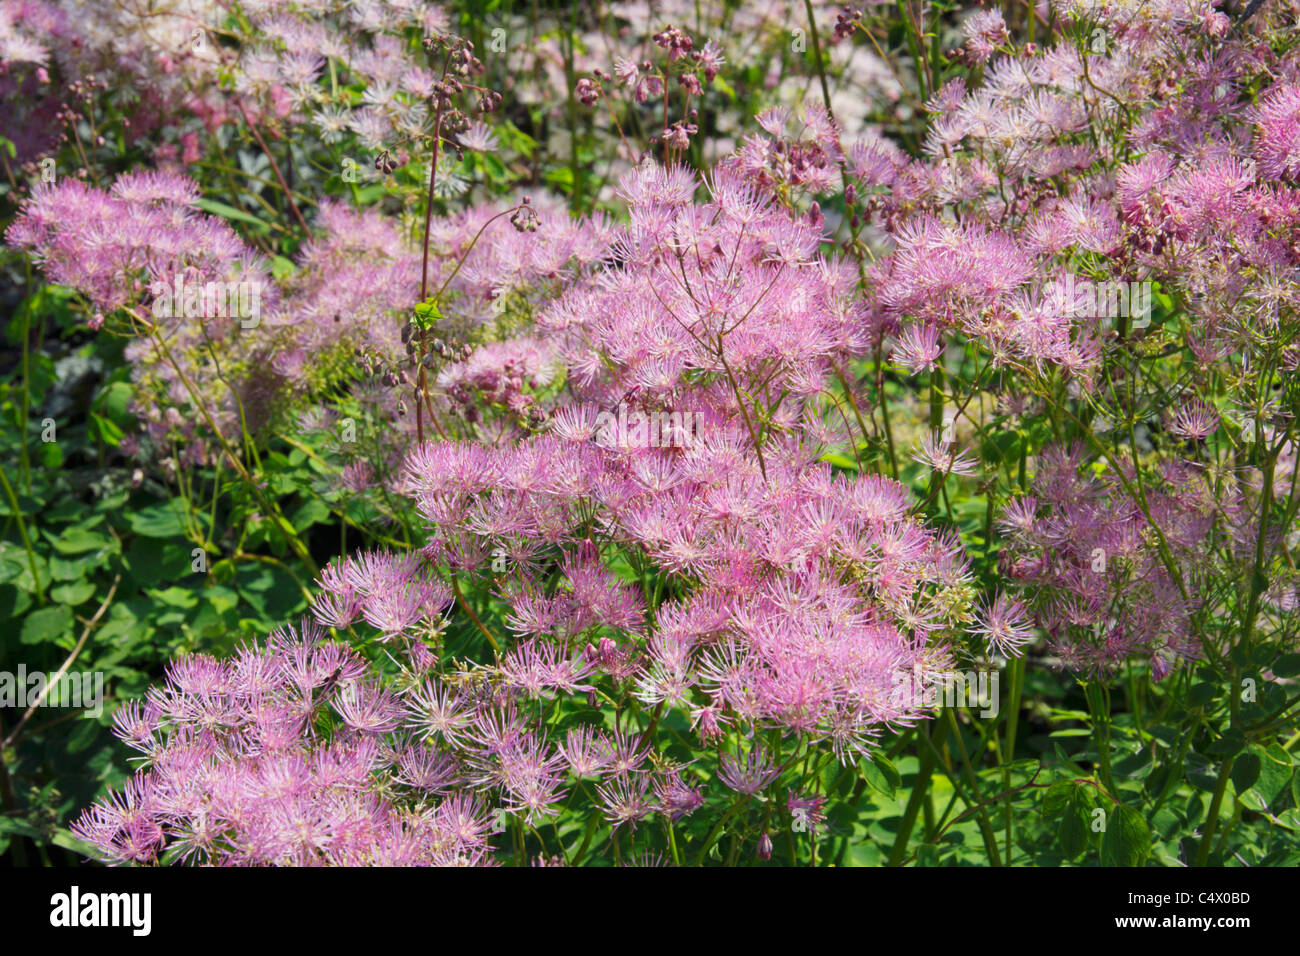 Pink flowers of Meadow Rue or Thalictrum lucidum Stock Photo